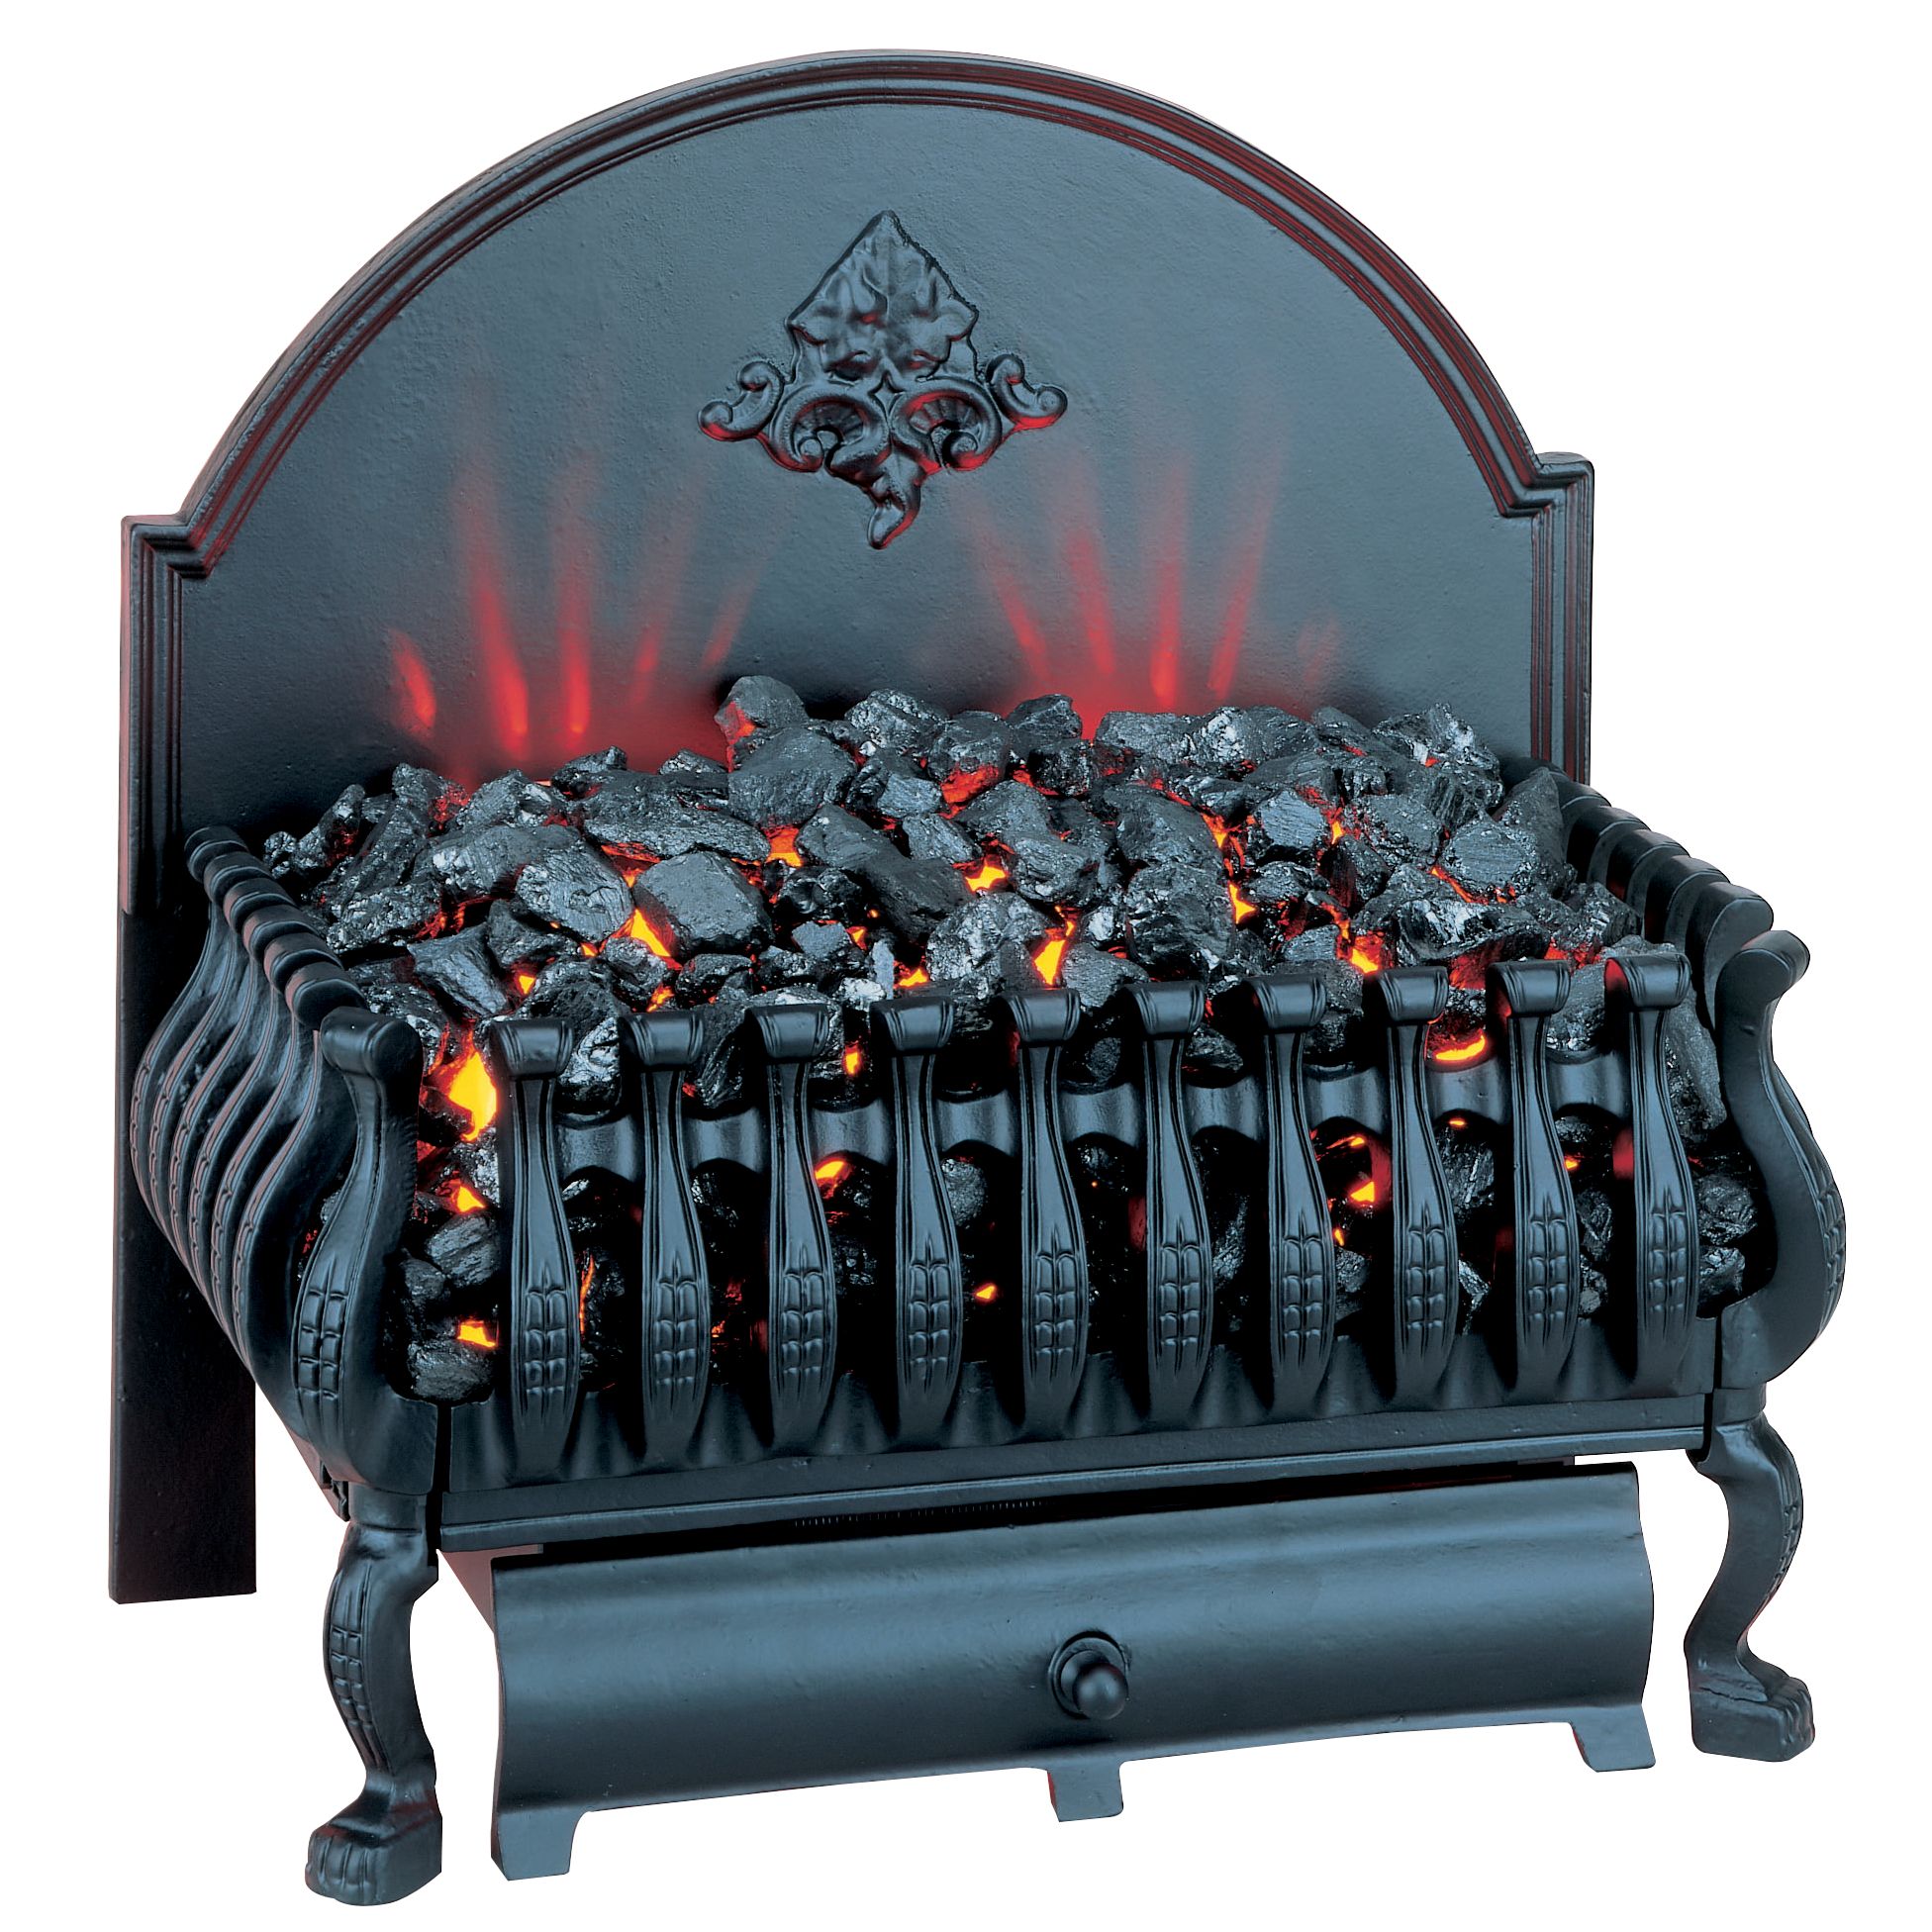 Burley Fuel-Effect Electric Fire, Cottesmore 224, Black Legs at John Lewis